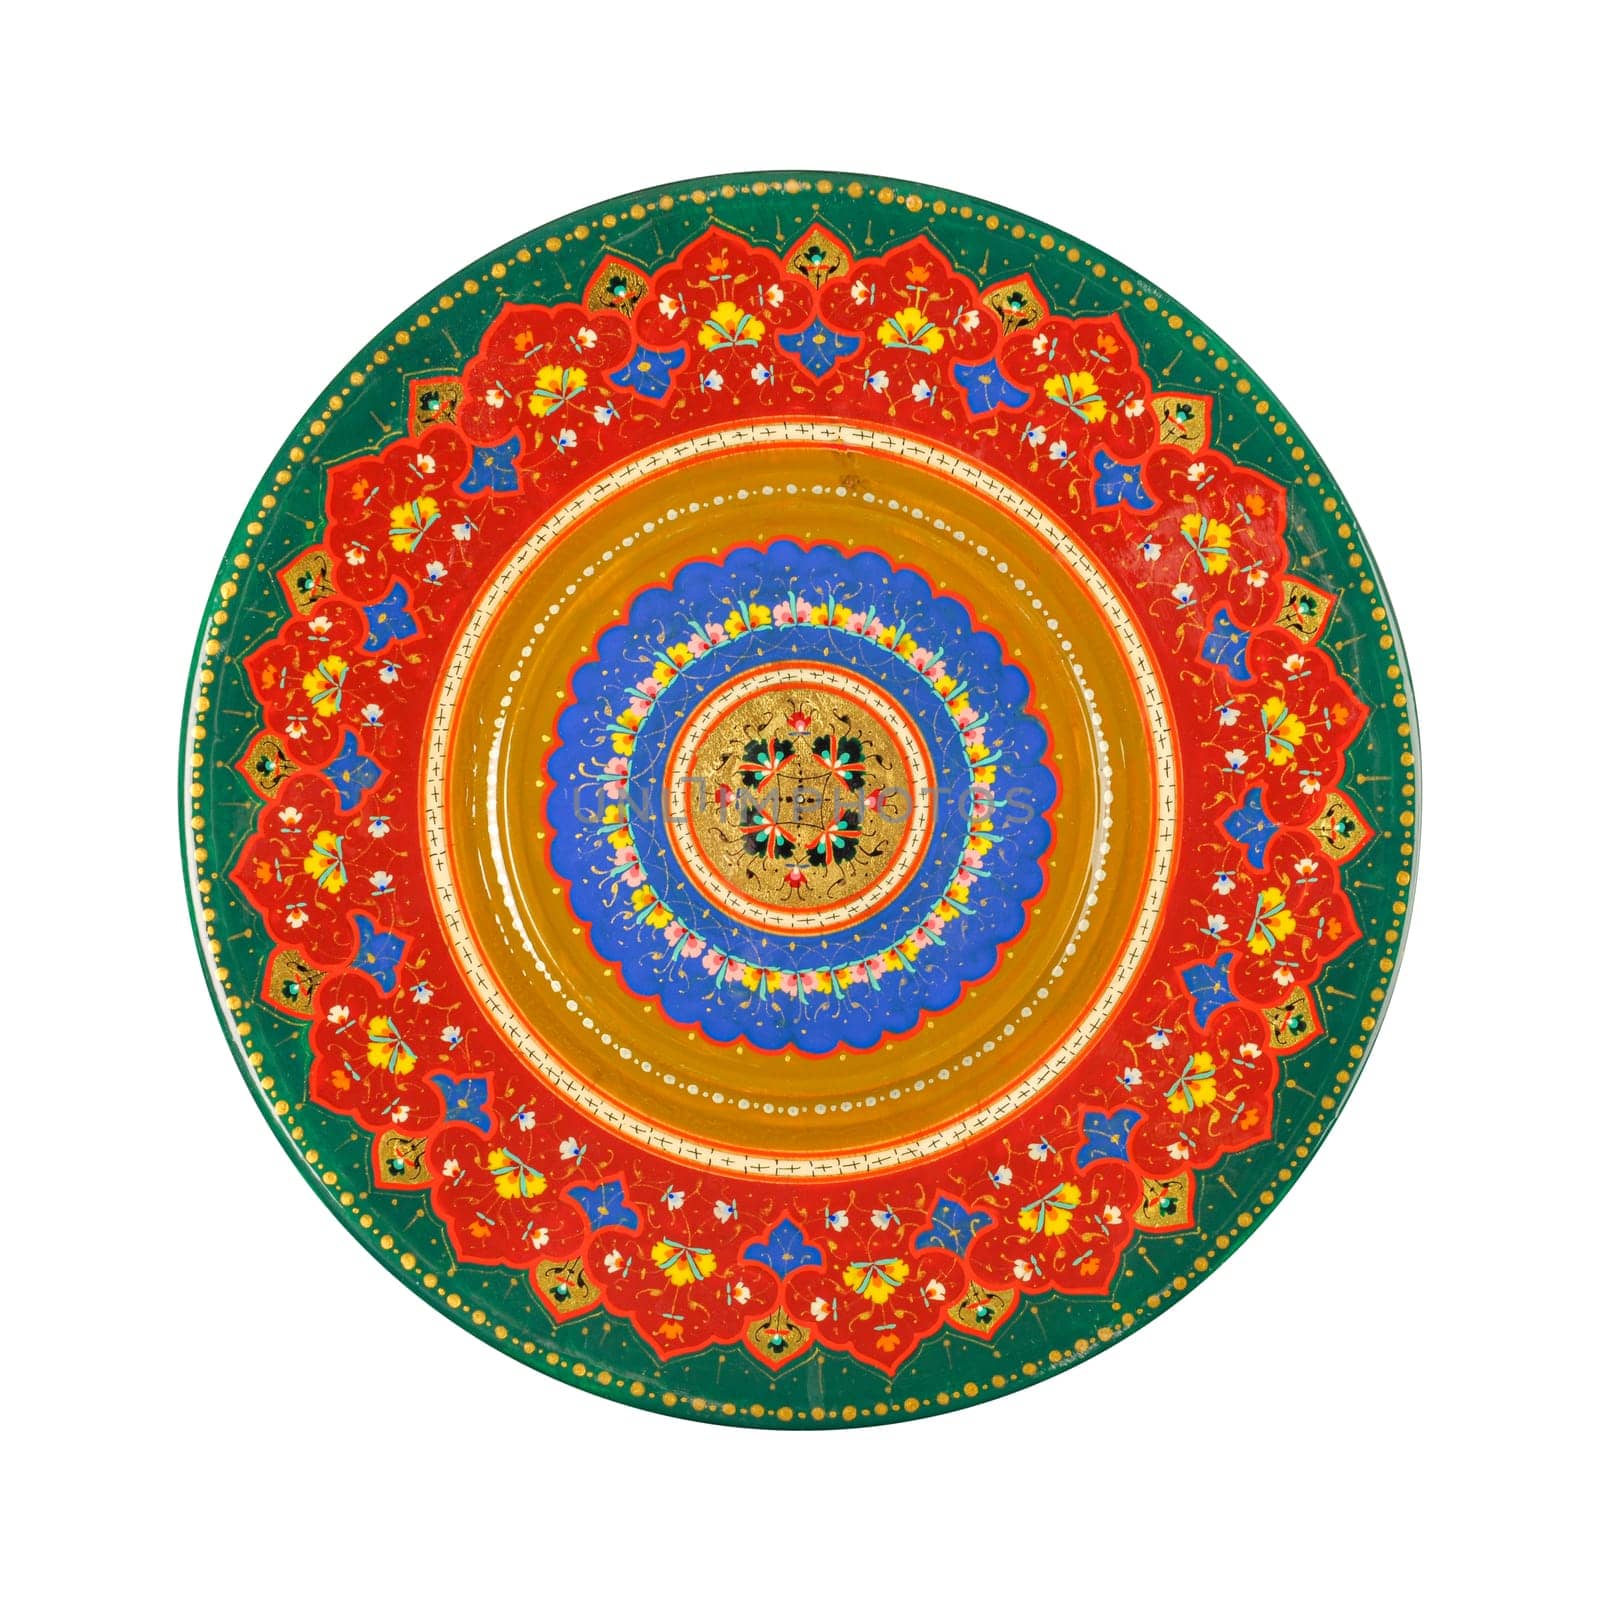 A top view of an oriental ceramic plate with a floral pattern on a white background, Uzbekistan